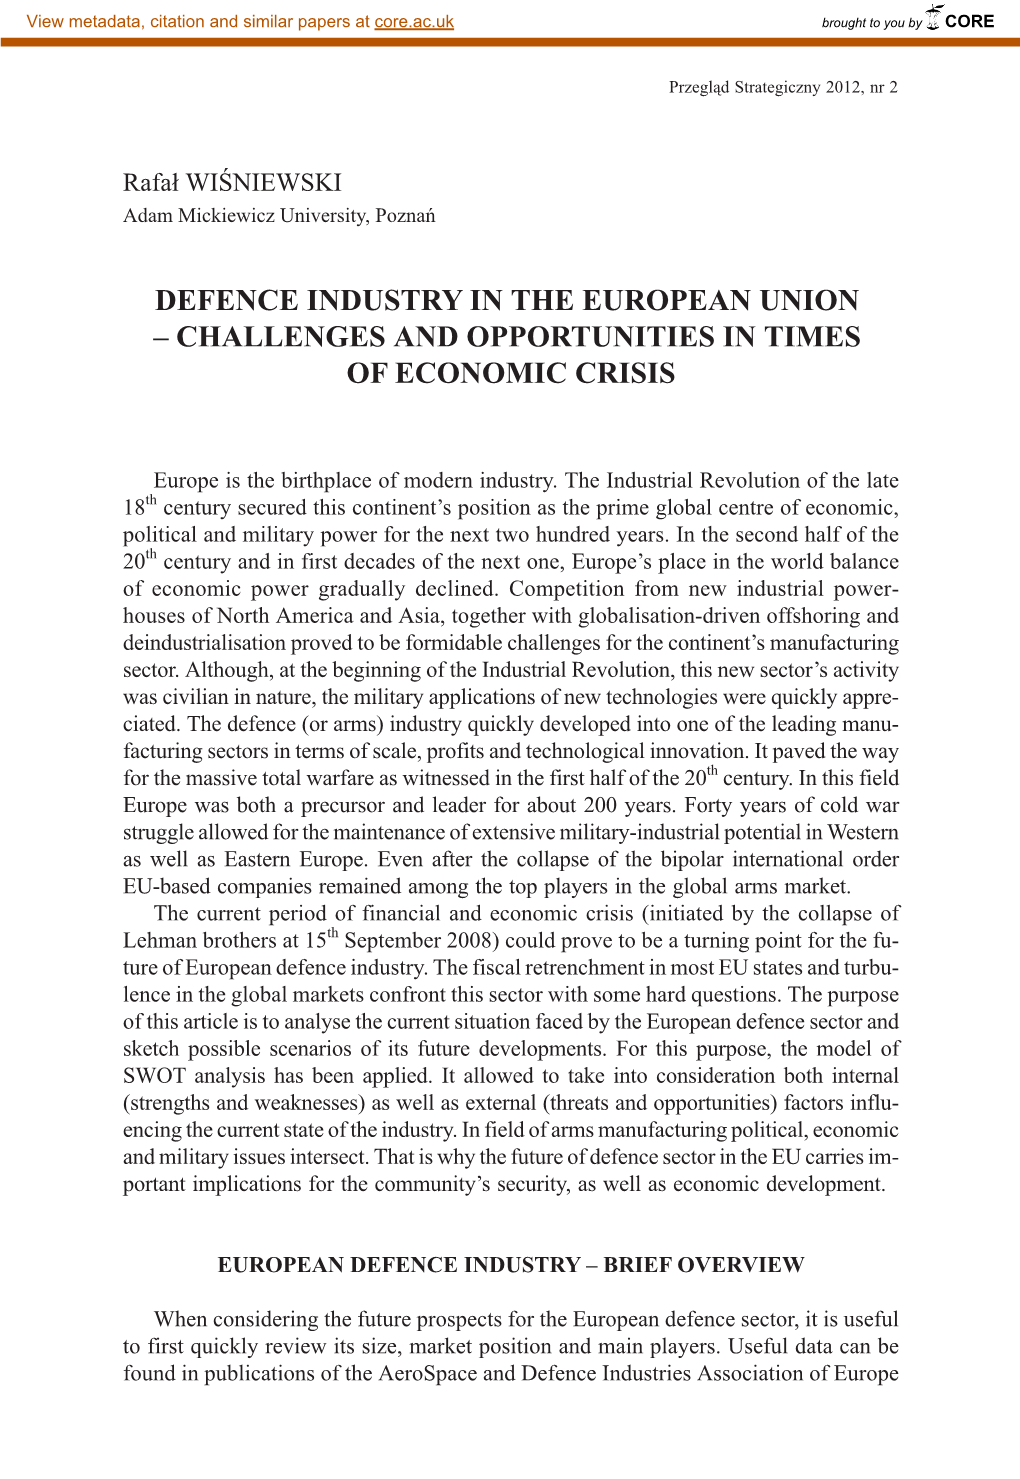 Defence Industry in the European Union – Challenges and Opportunities in Times of Economic Crisis